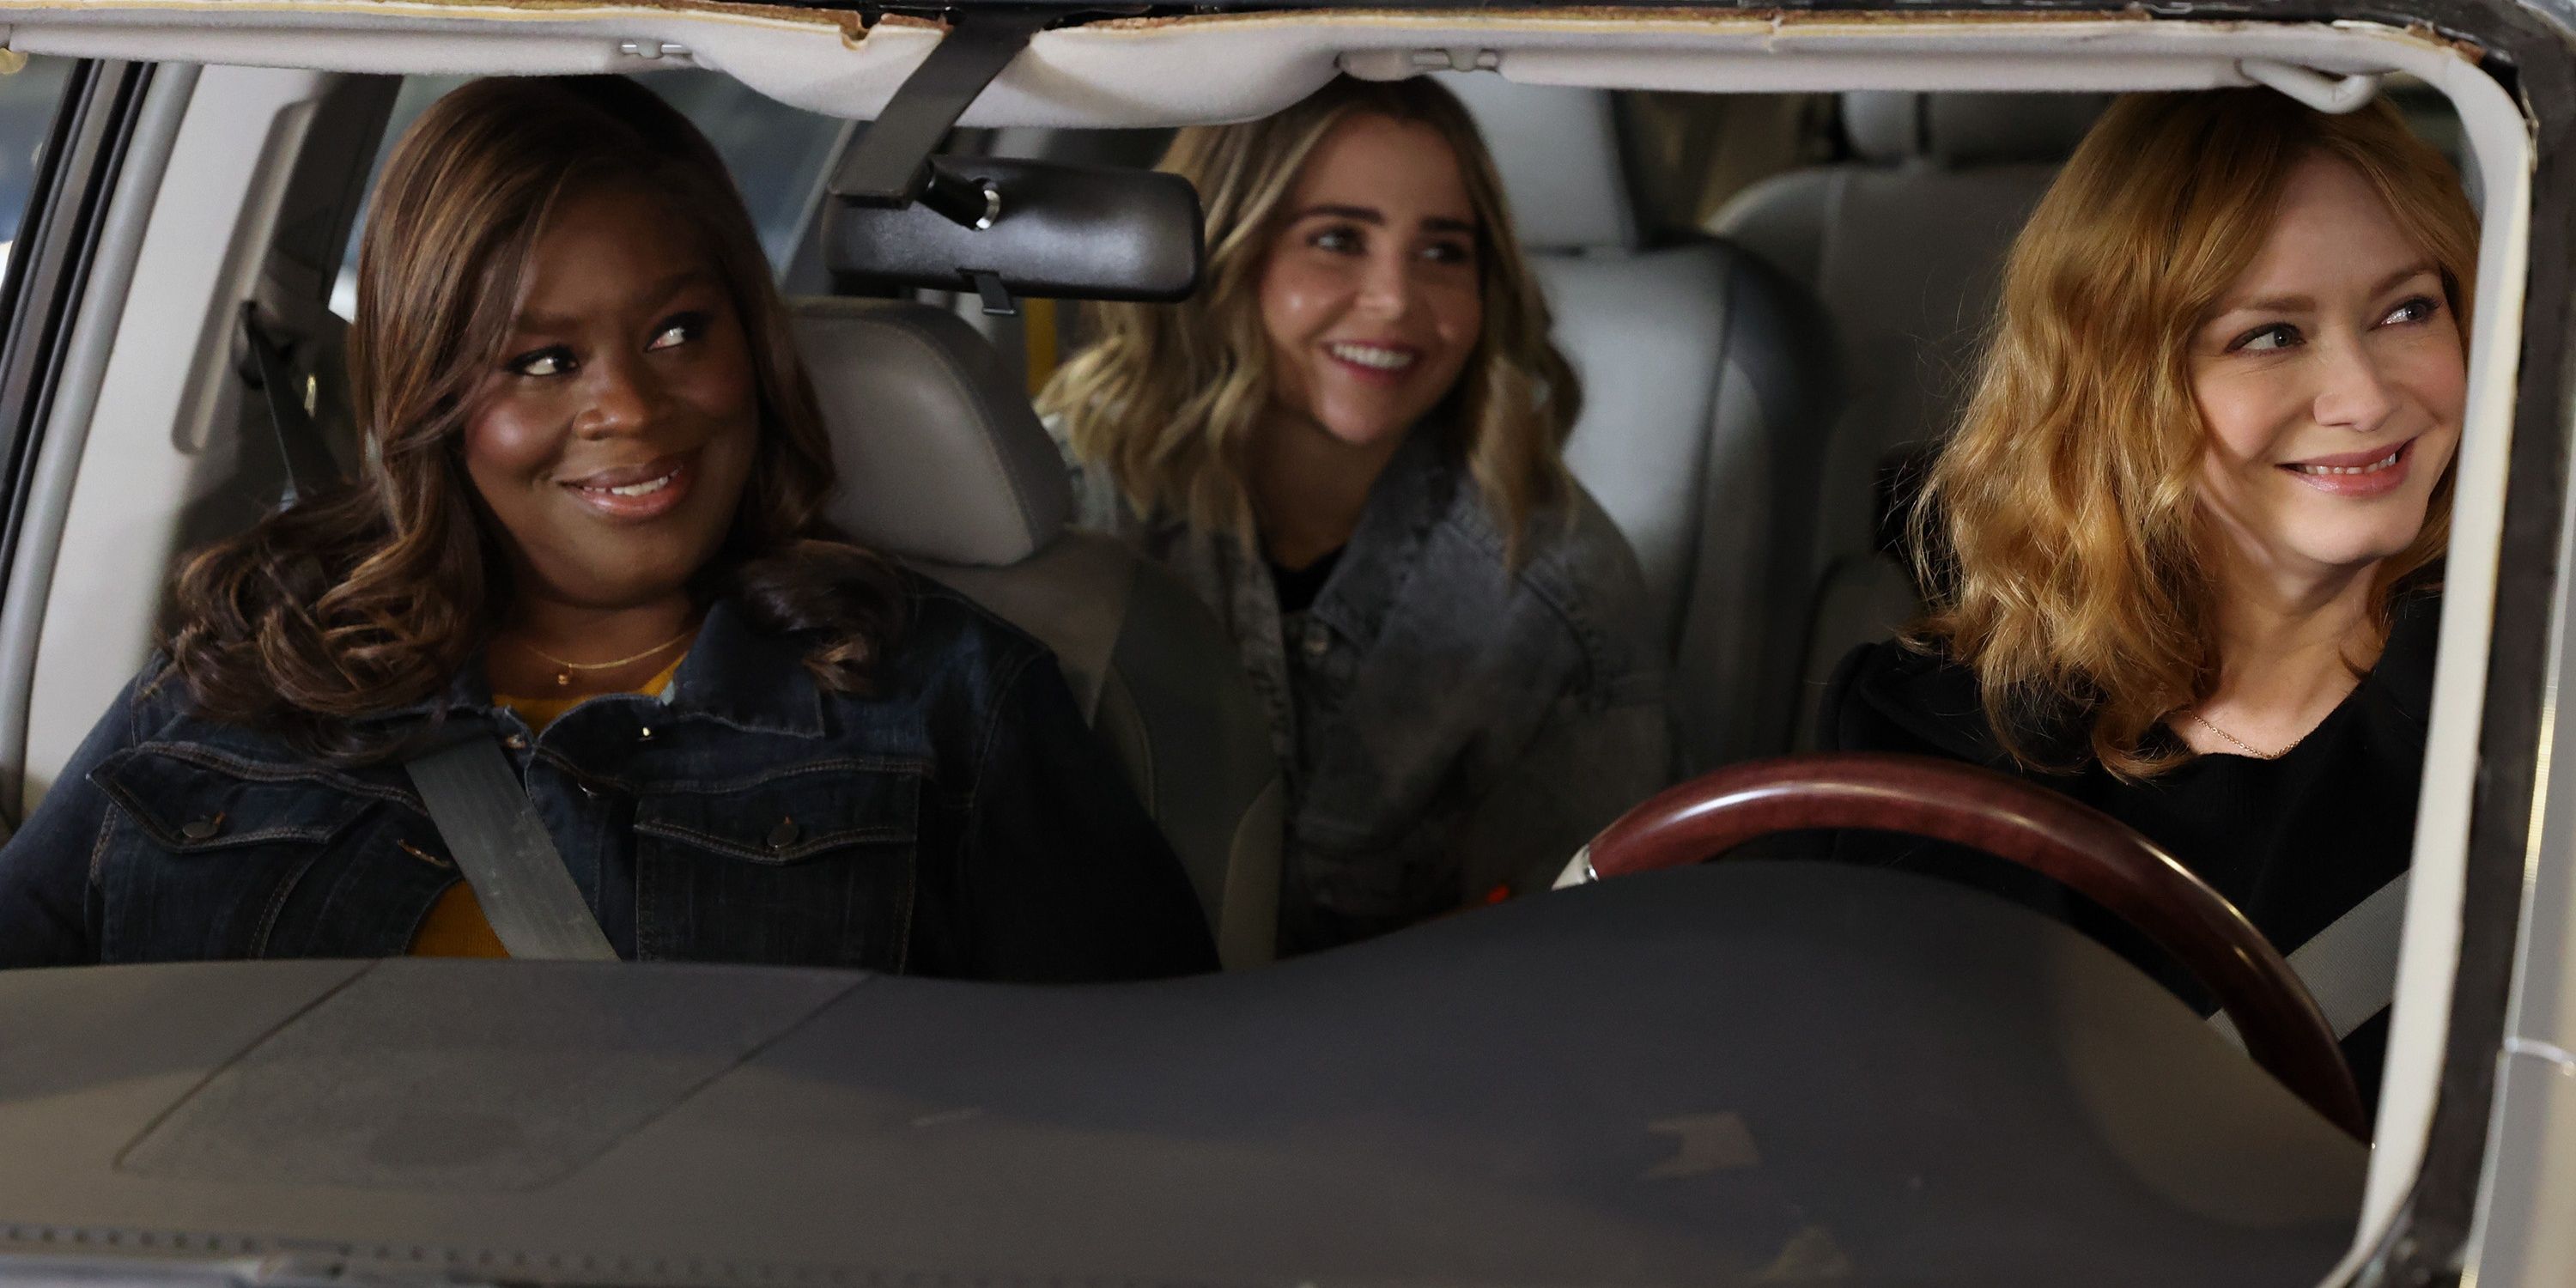 RUby Annie and Beth in Good Girls